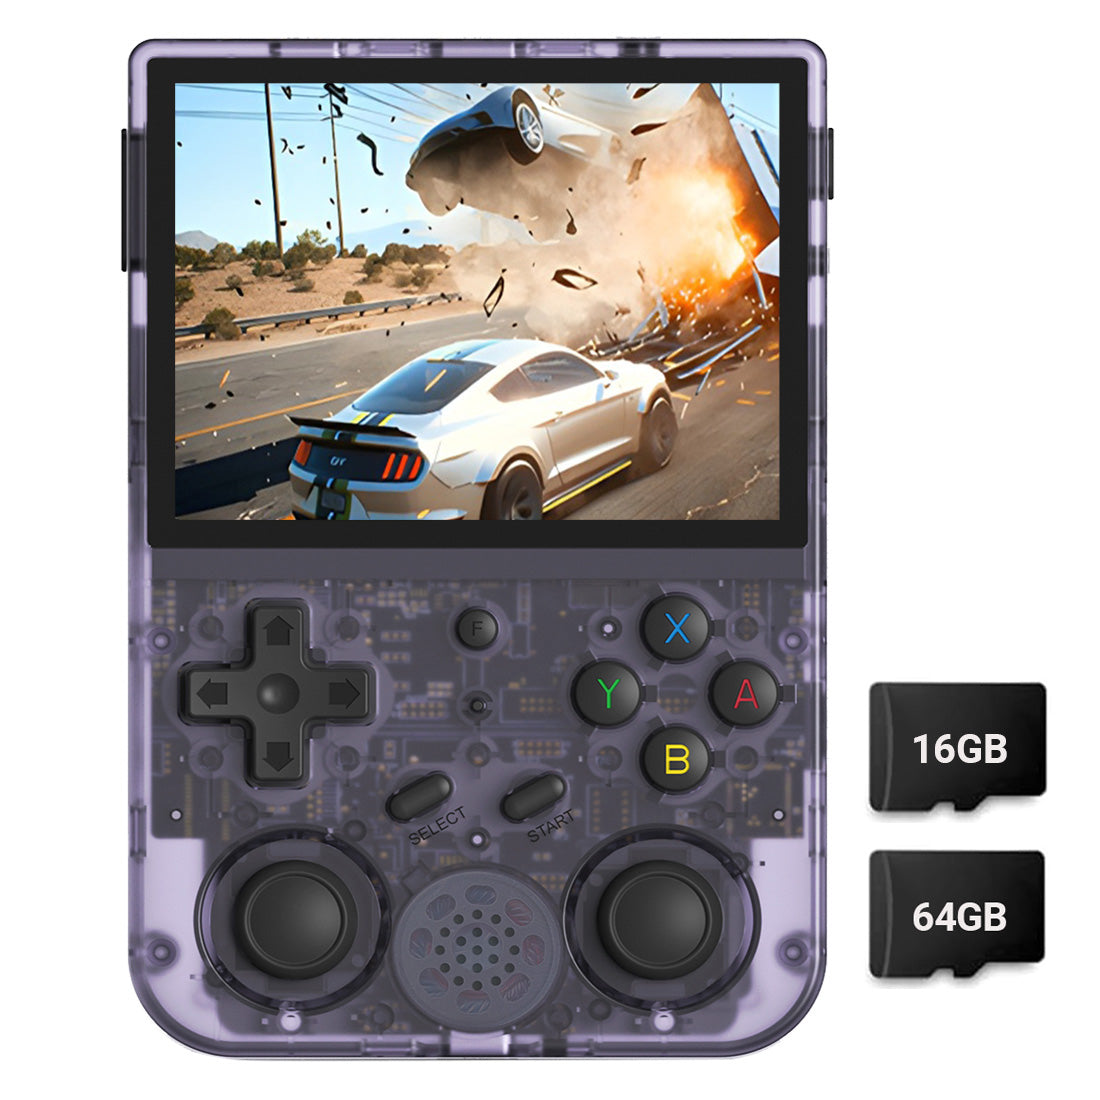 Anbernic RG351P Vibration Handheld Game Console 3.5 inch Screen Game Player  